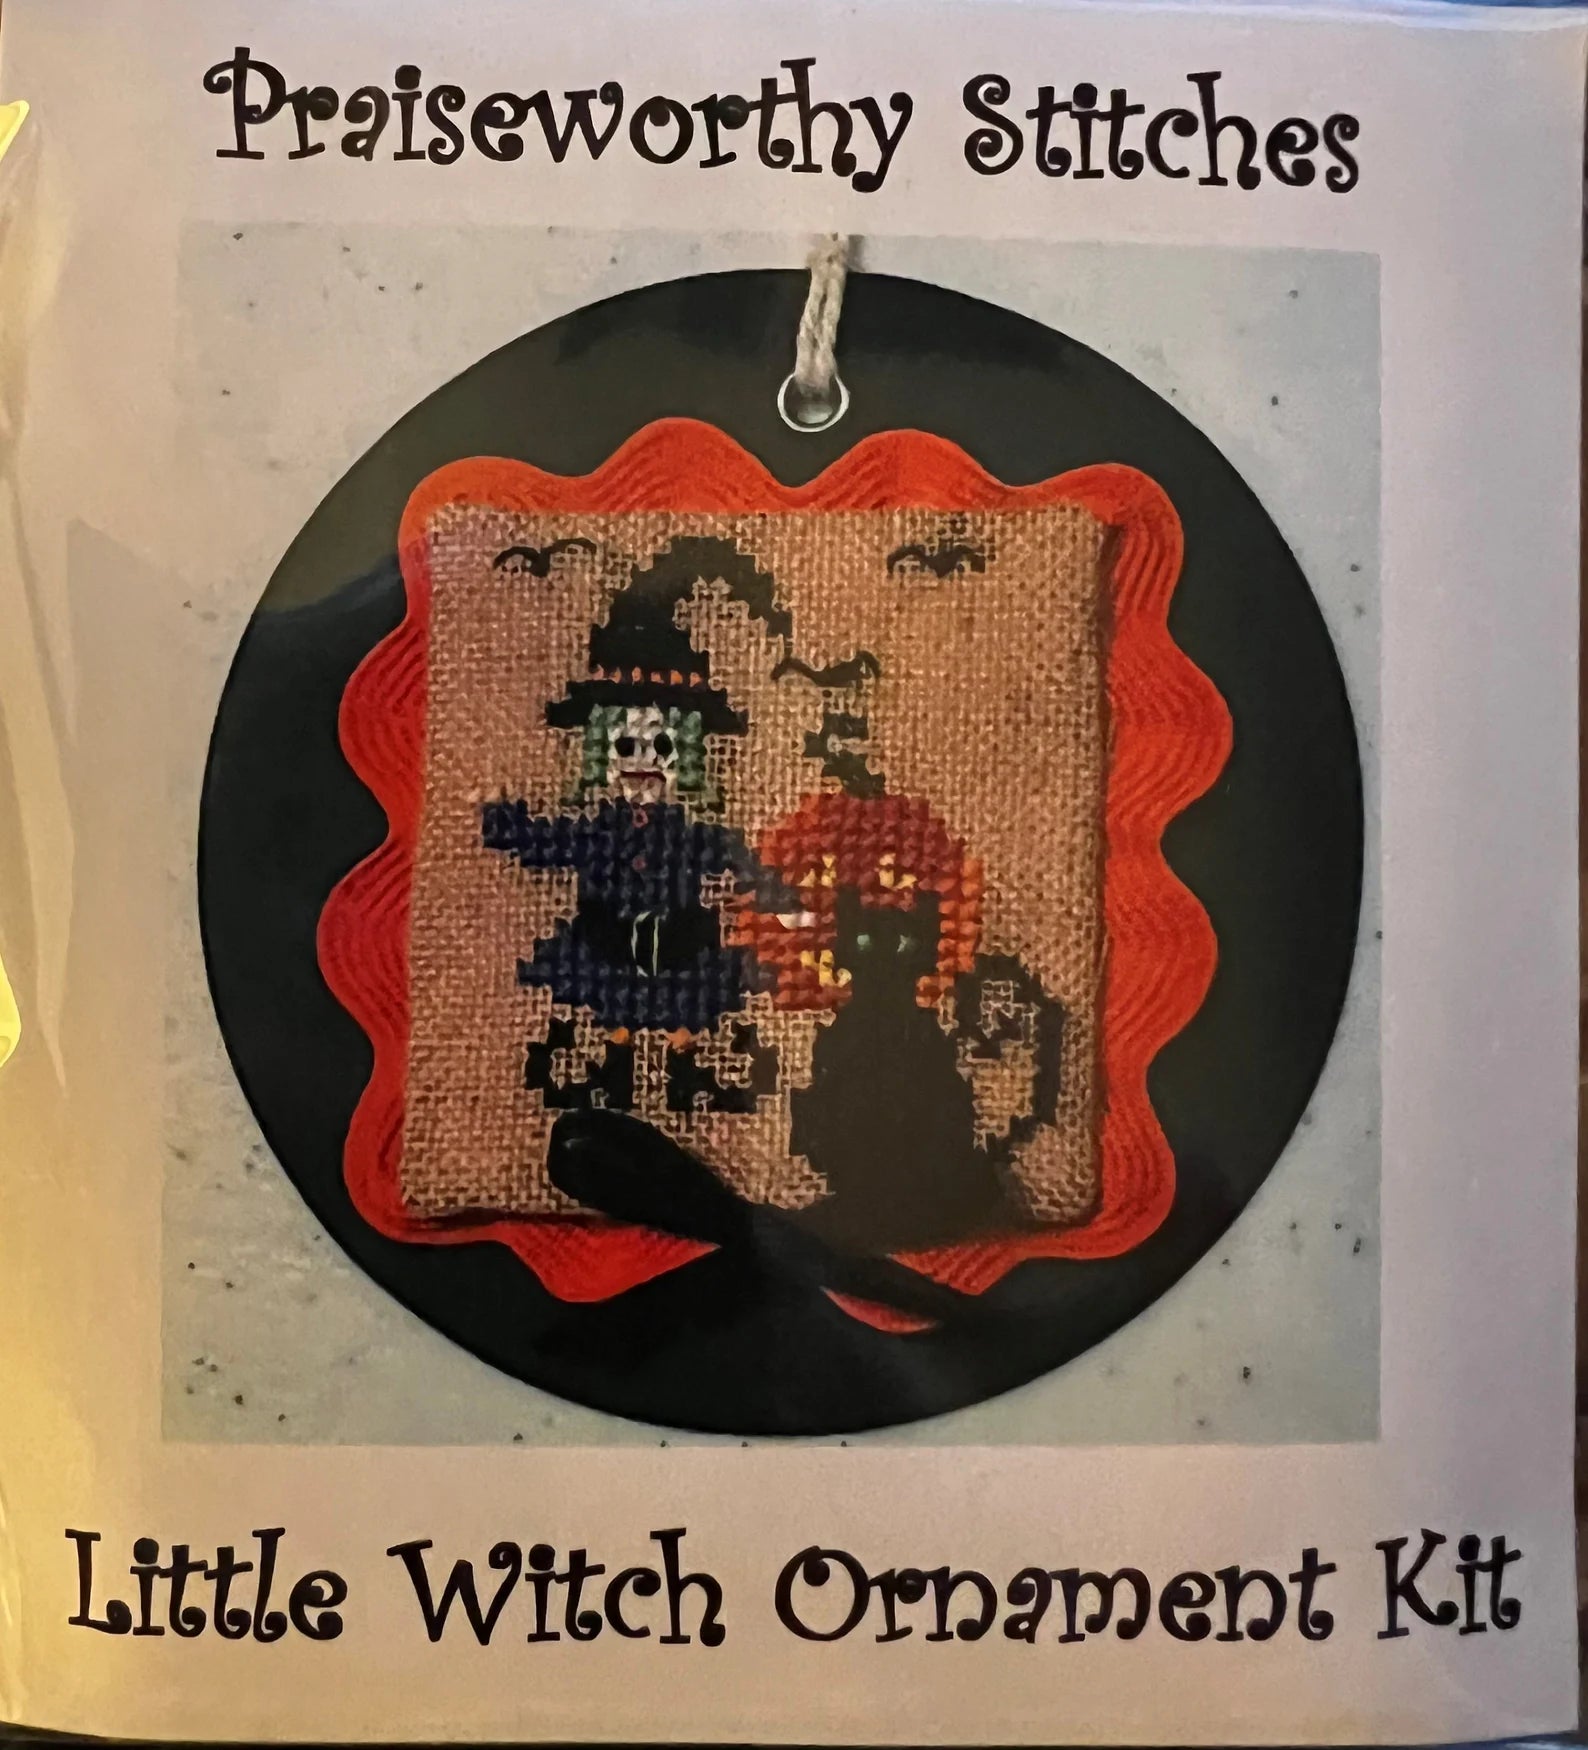 Little Witch Ornament Kit by Praiseworthy Stitches